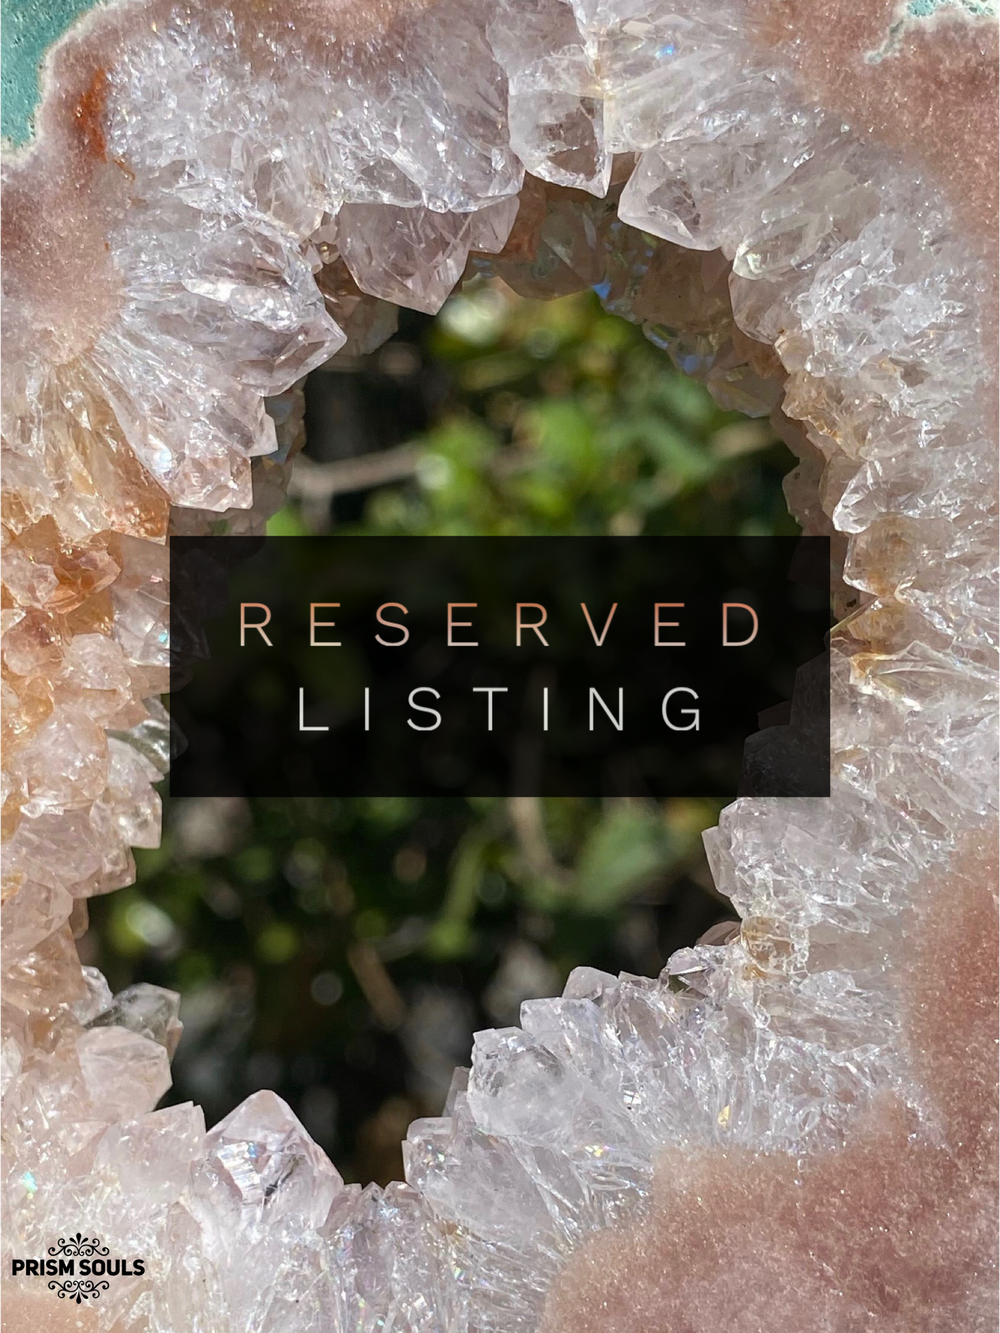 RESERVED LISTING - mickythiess